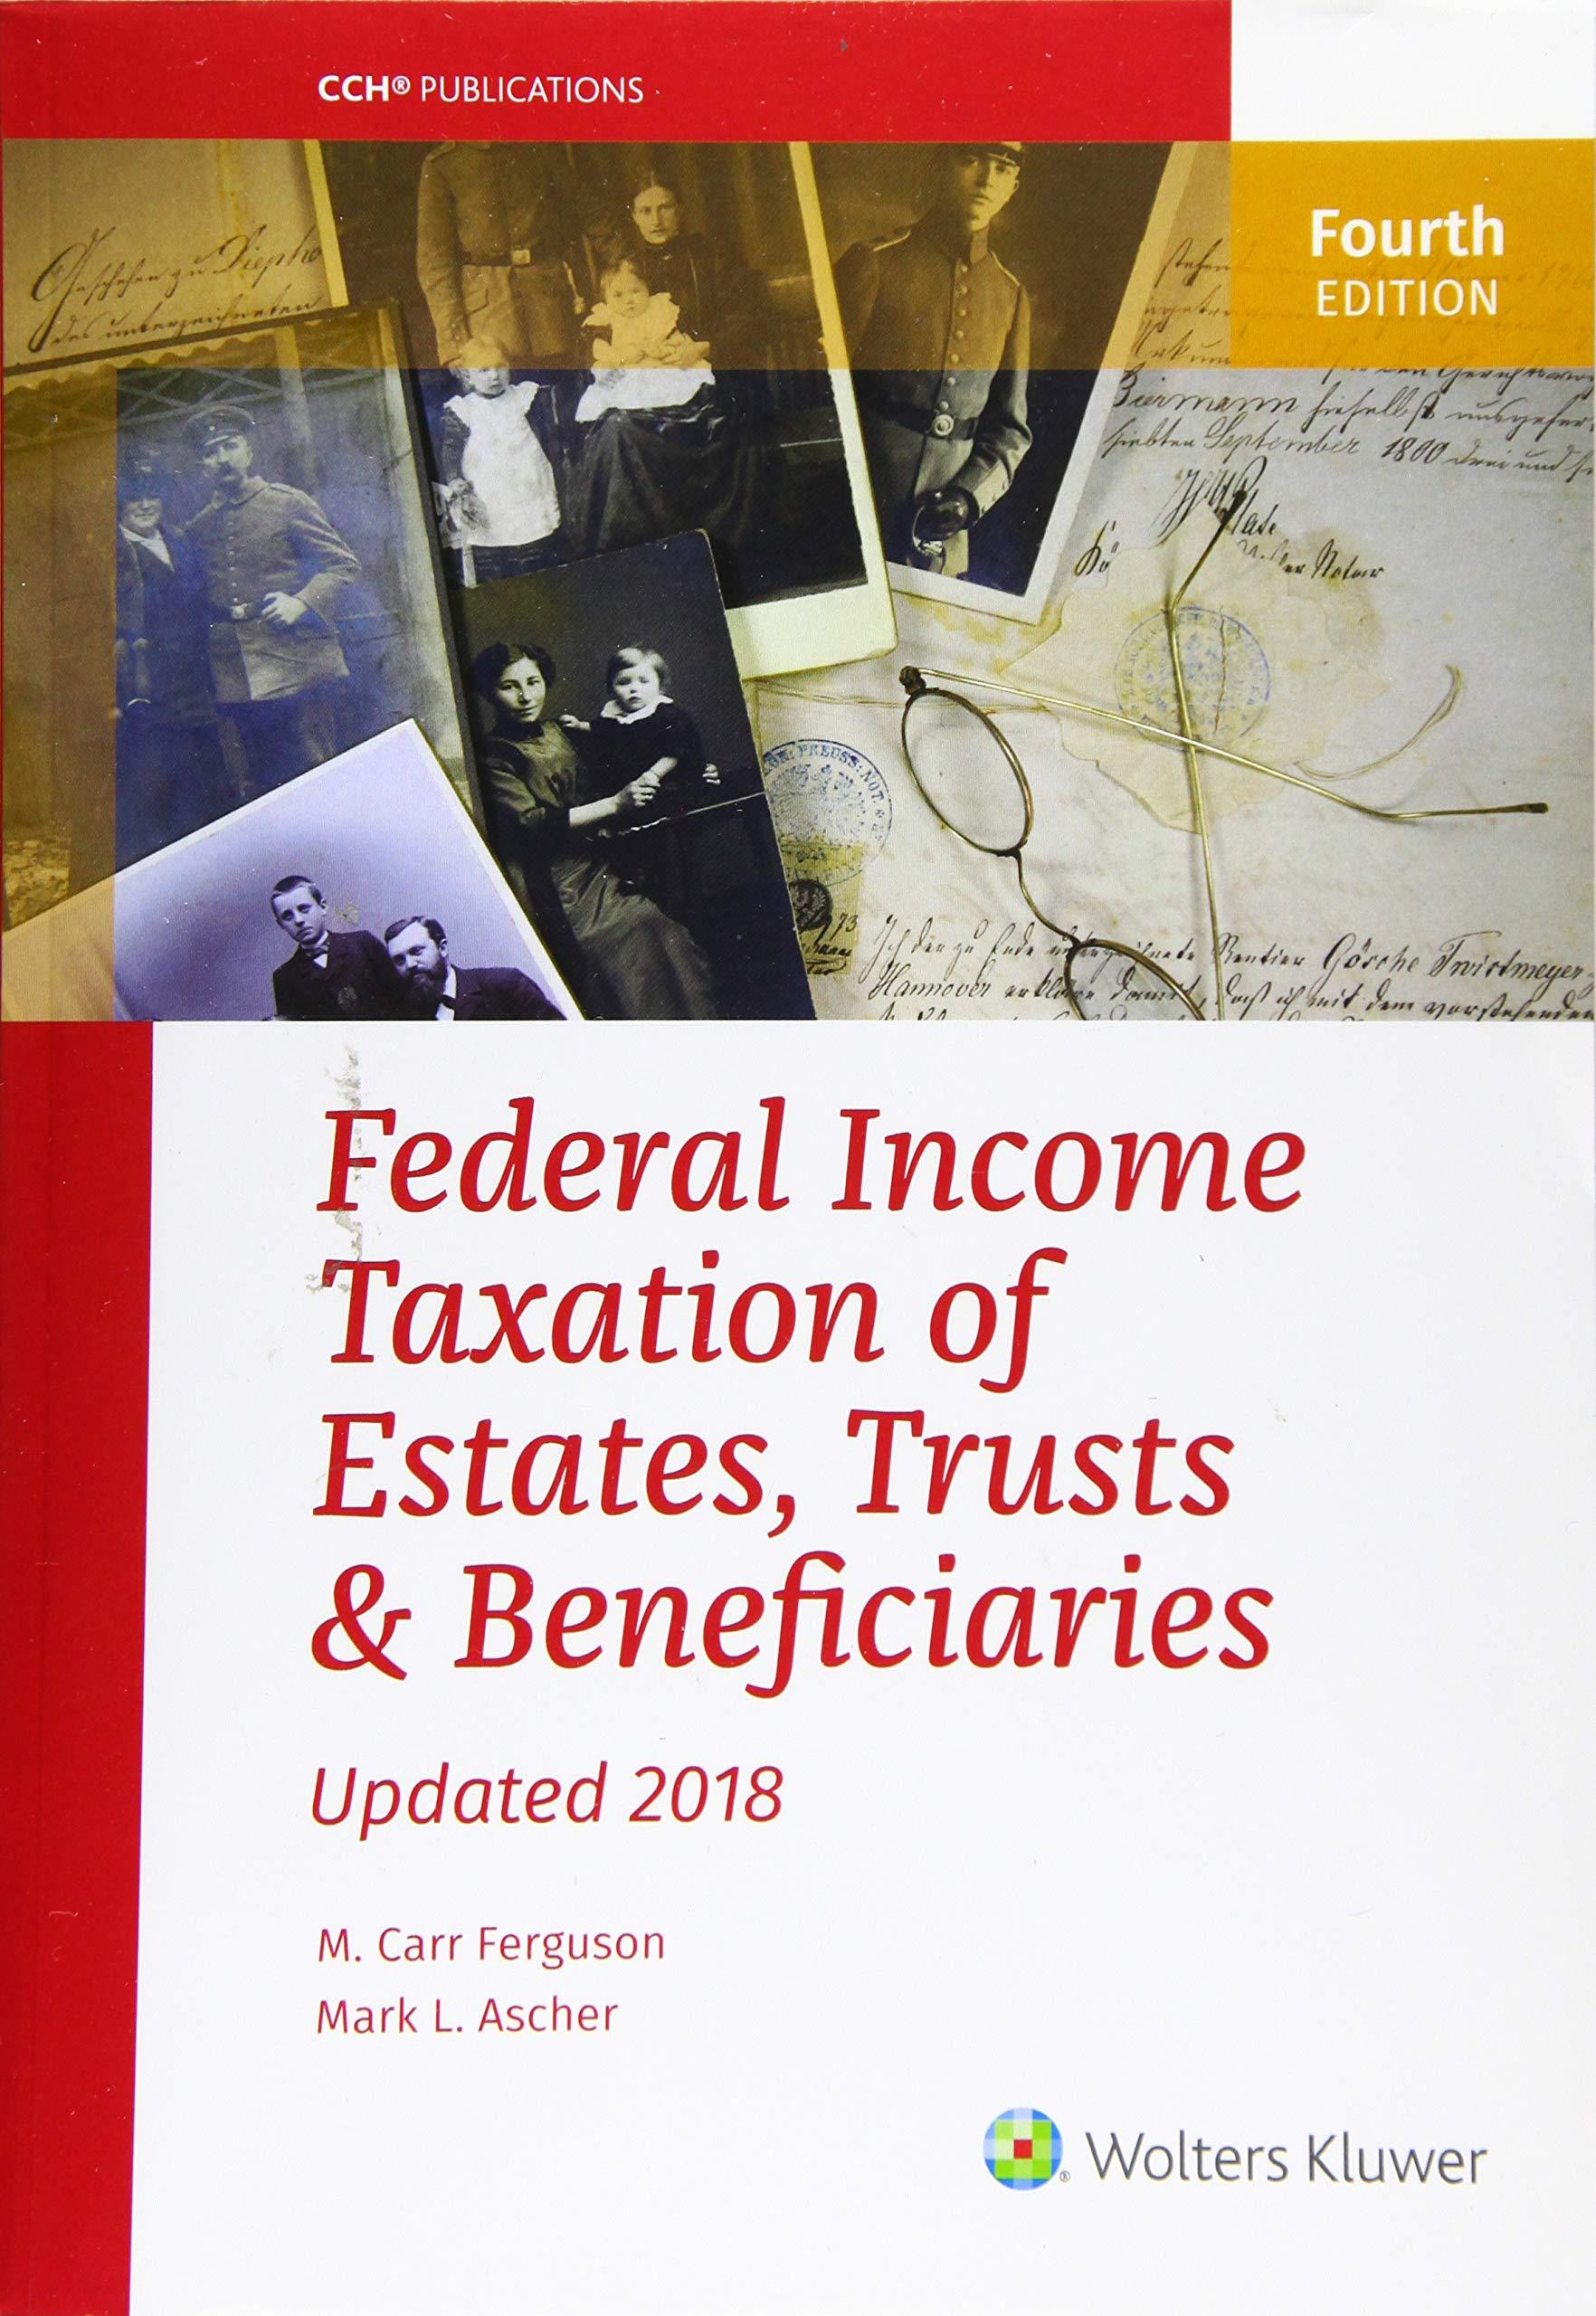 federal income taxation of estates trusts and beneficiaries 2018 4th edition m. carr ferguson, mark l. ascher